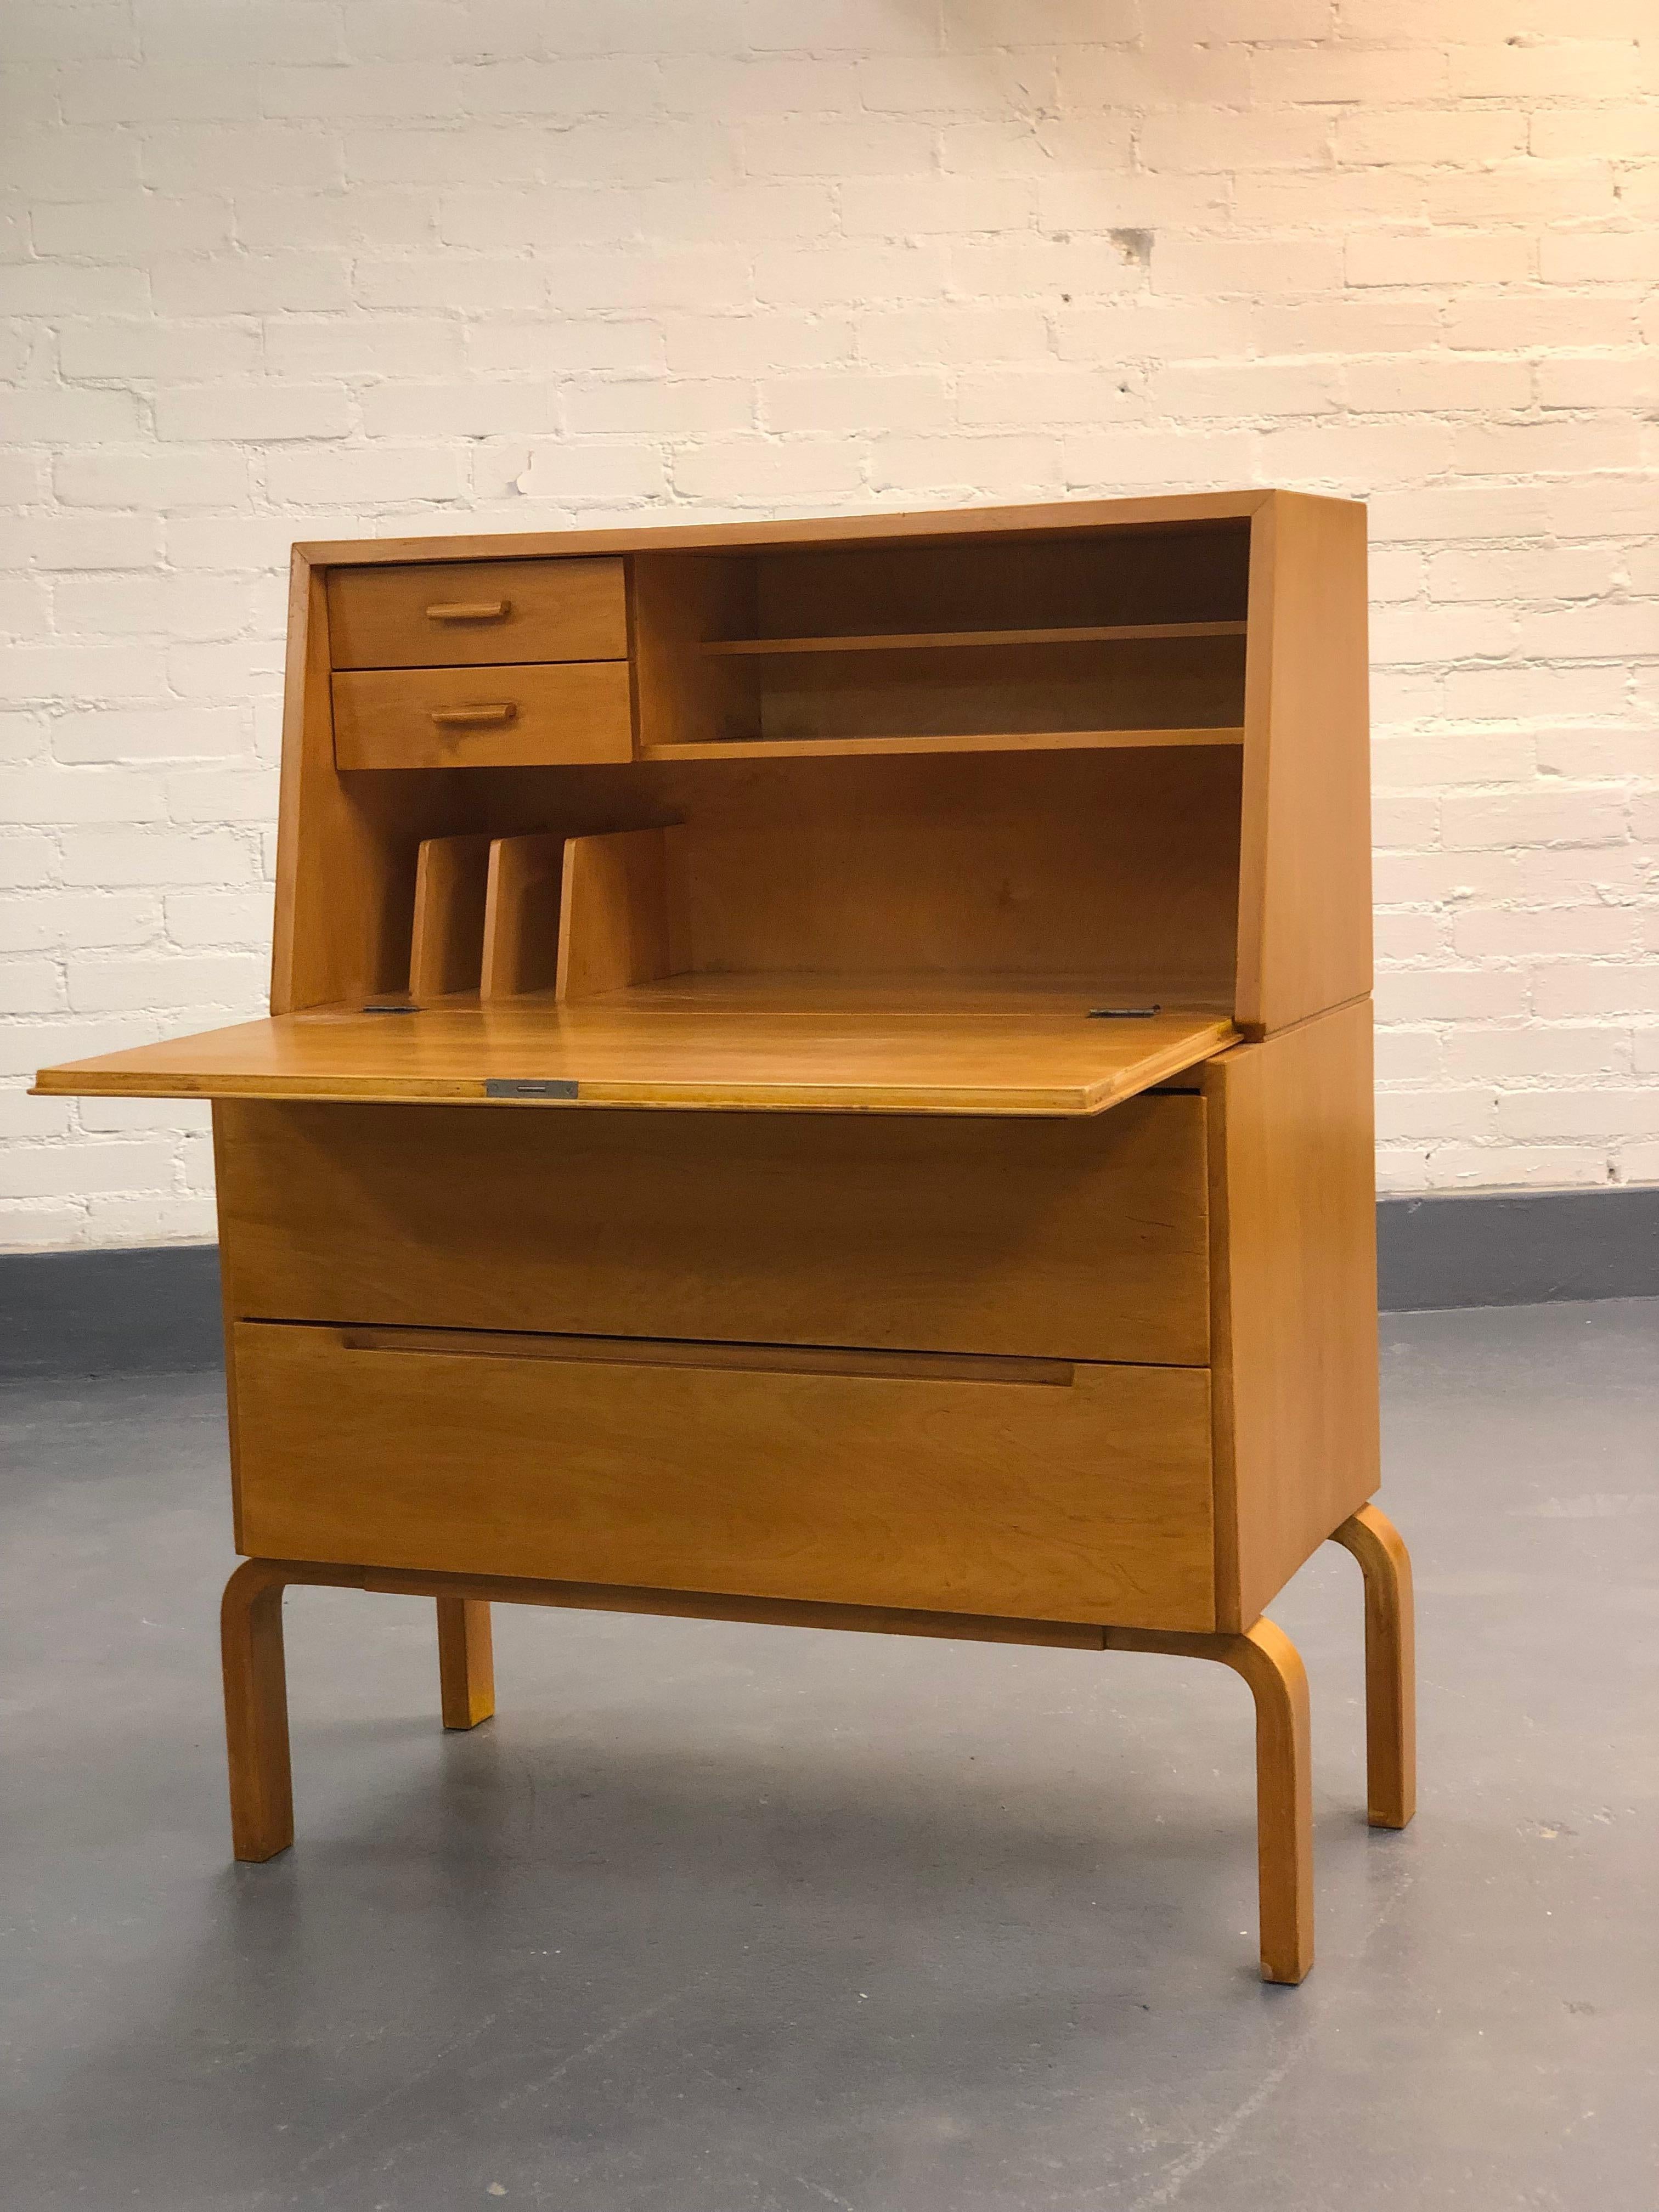 An exceedingly rare cabinet designed by Alvar Aalto. This item has sustained a great condition and has acquired a beautiful toned color in its lifespan of over 50 years. One of the best and rarest works of the world renowned architecture Alvar